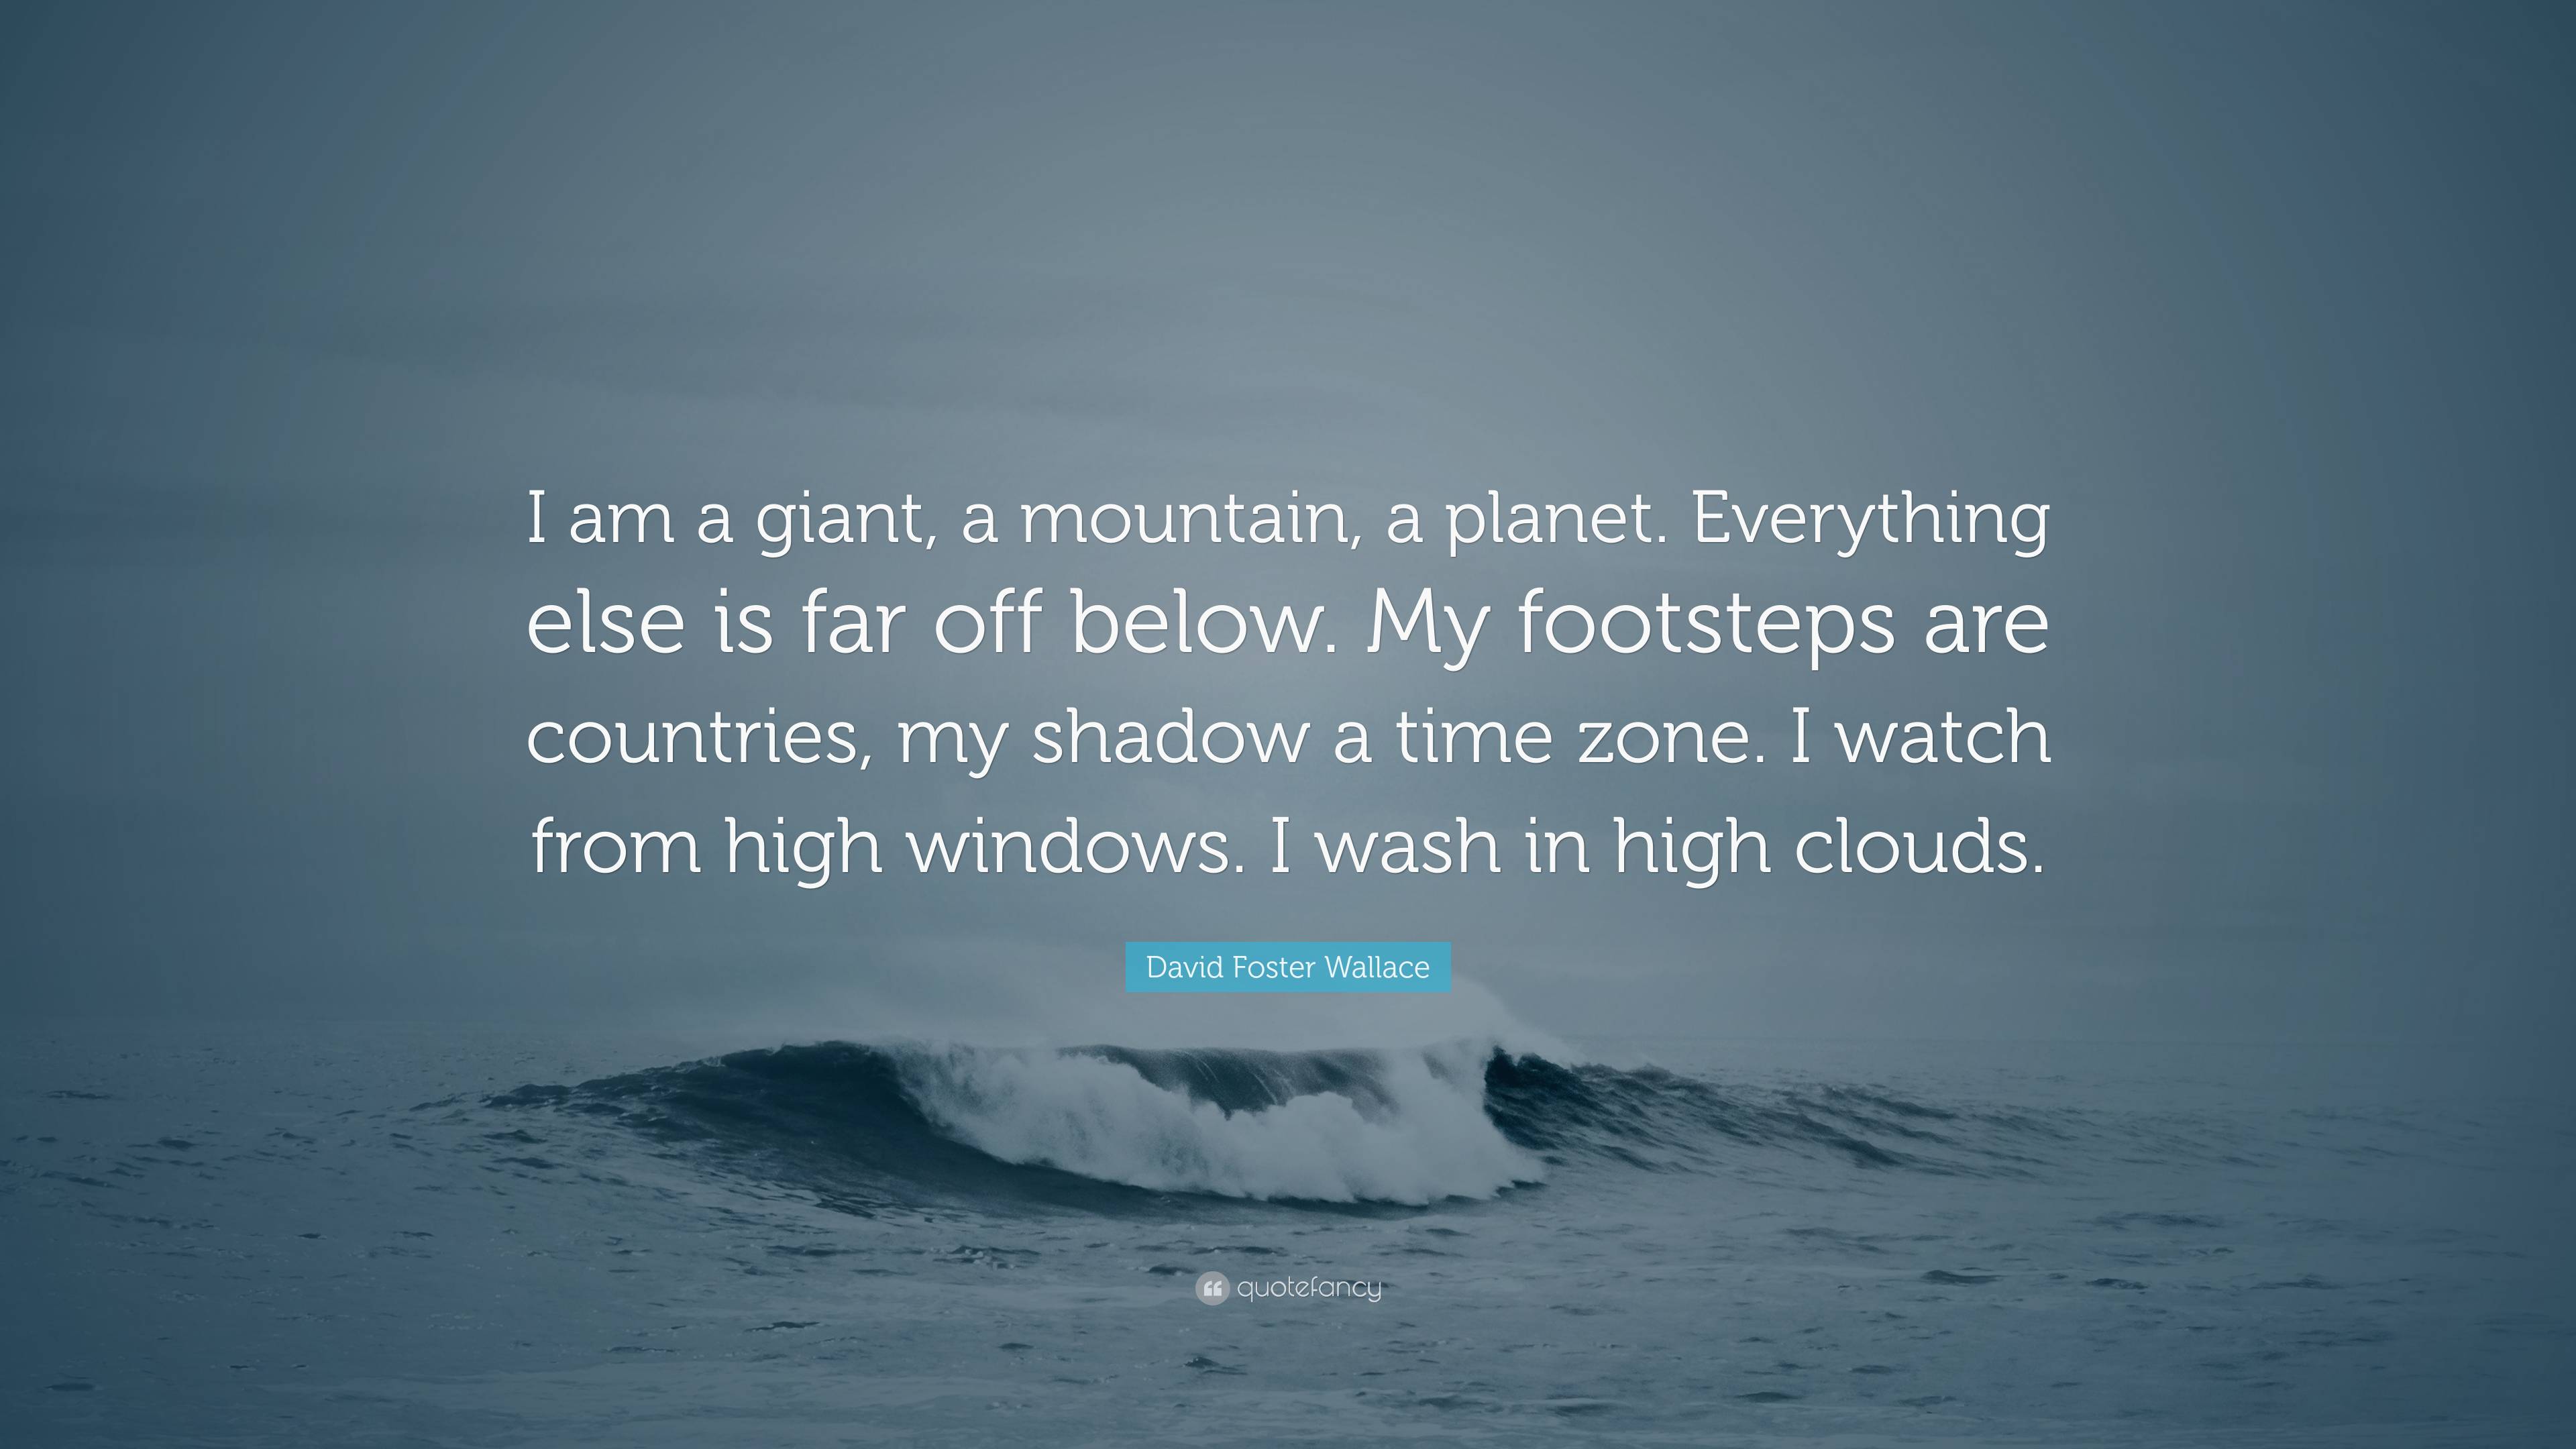 David Foster Wallace Quote: “I am a giant, a mountain, a planet. Everything  else is far off below. My footsteps are countries, my shadow a time  zone.”